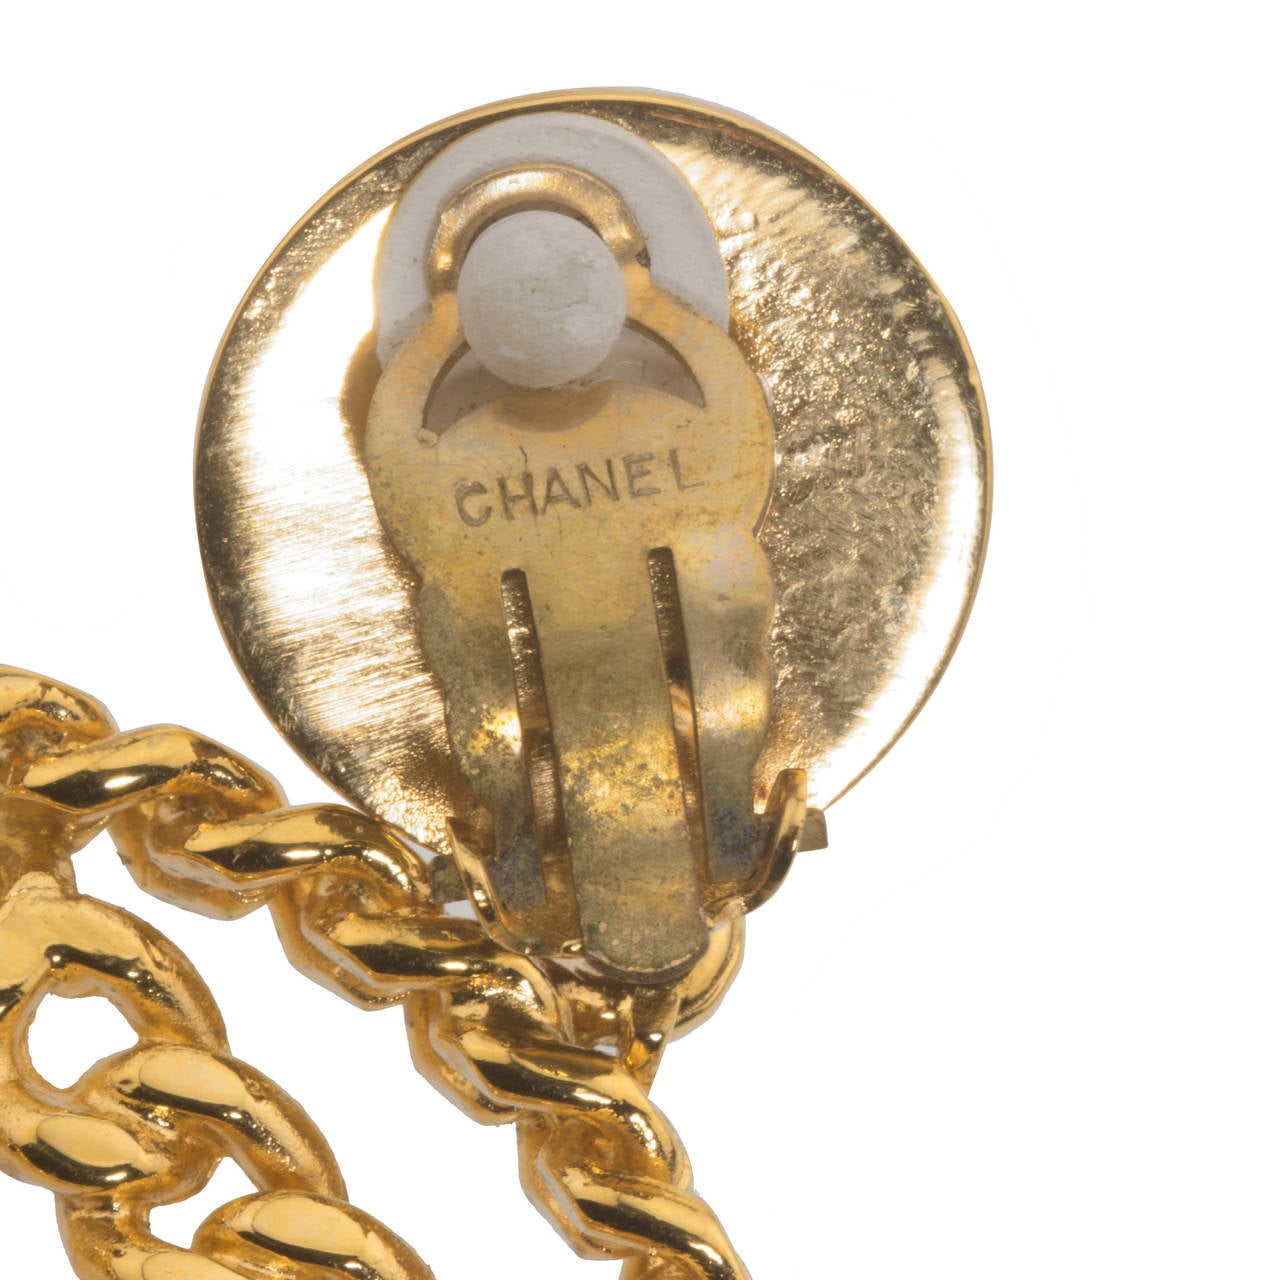 Extremely rare vintage Chanel No.5 earrings with chain motif earrings.